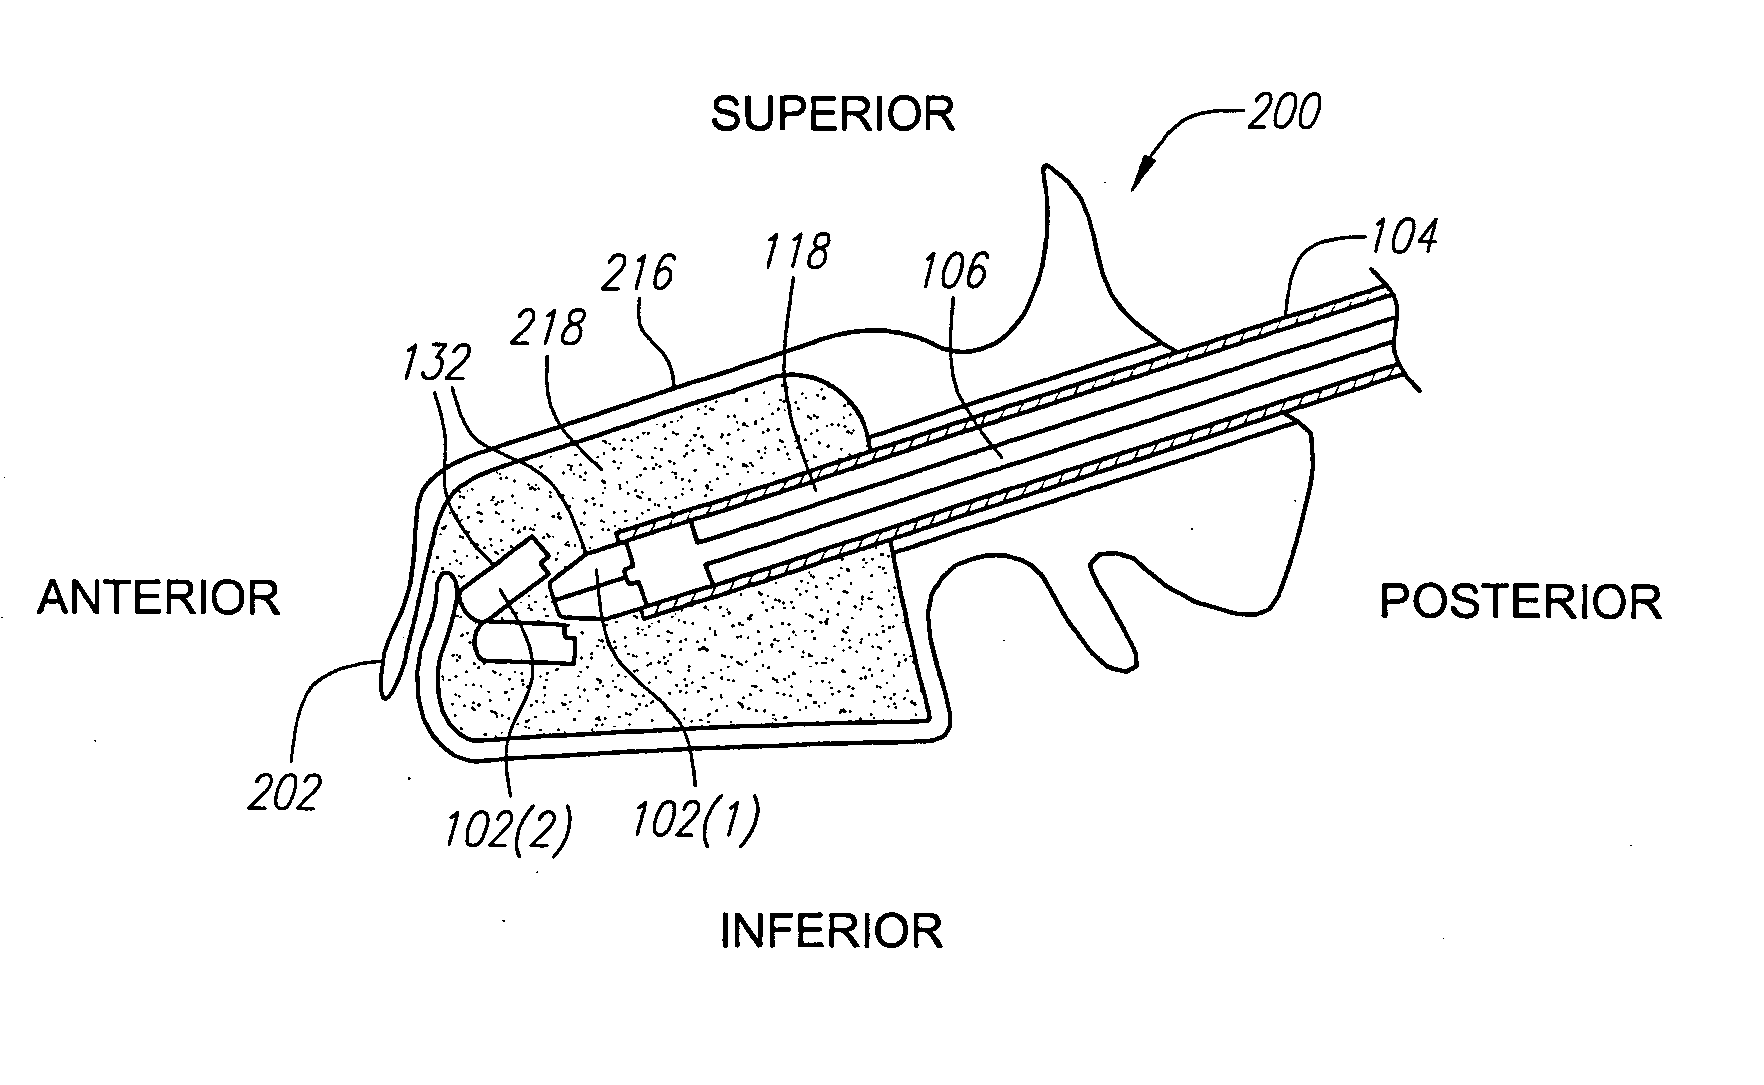 Apparatus and methods of reducing bone compression fractures using wedges